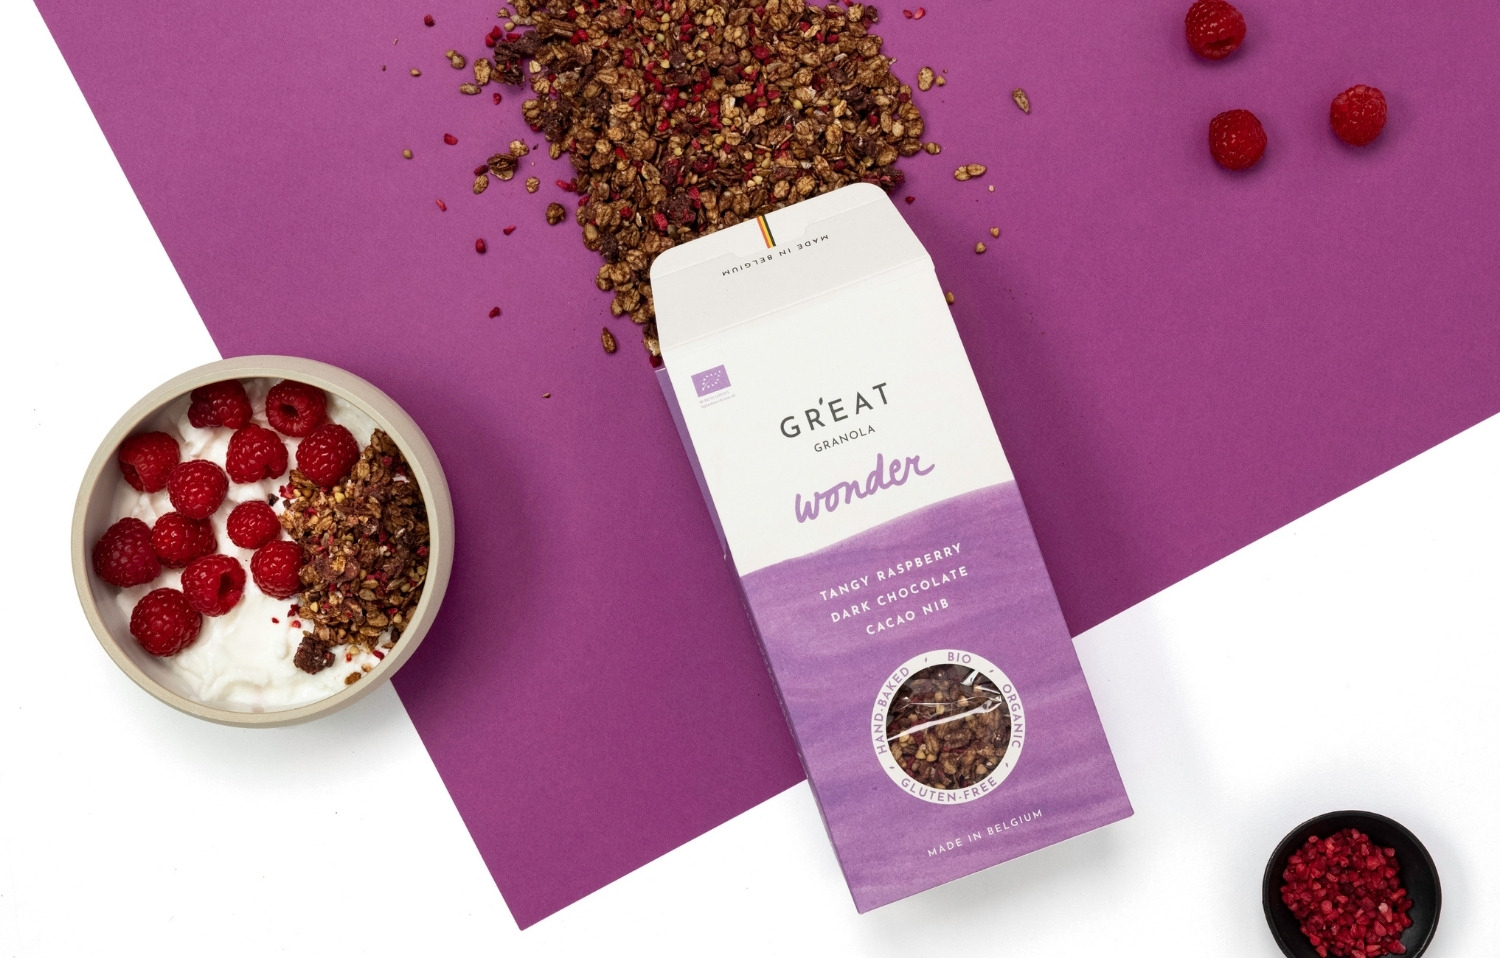 Indulge with the intensity of dark chocolate, the crunch of cocoa nibs and tangy flavor of raspberries.